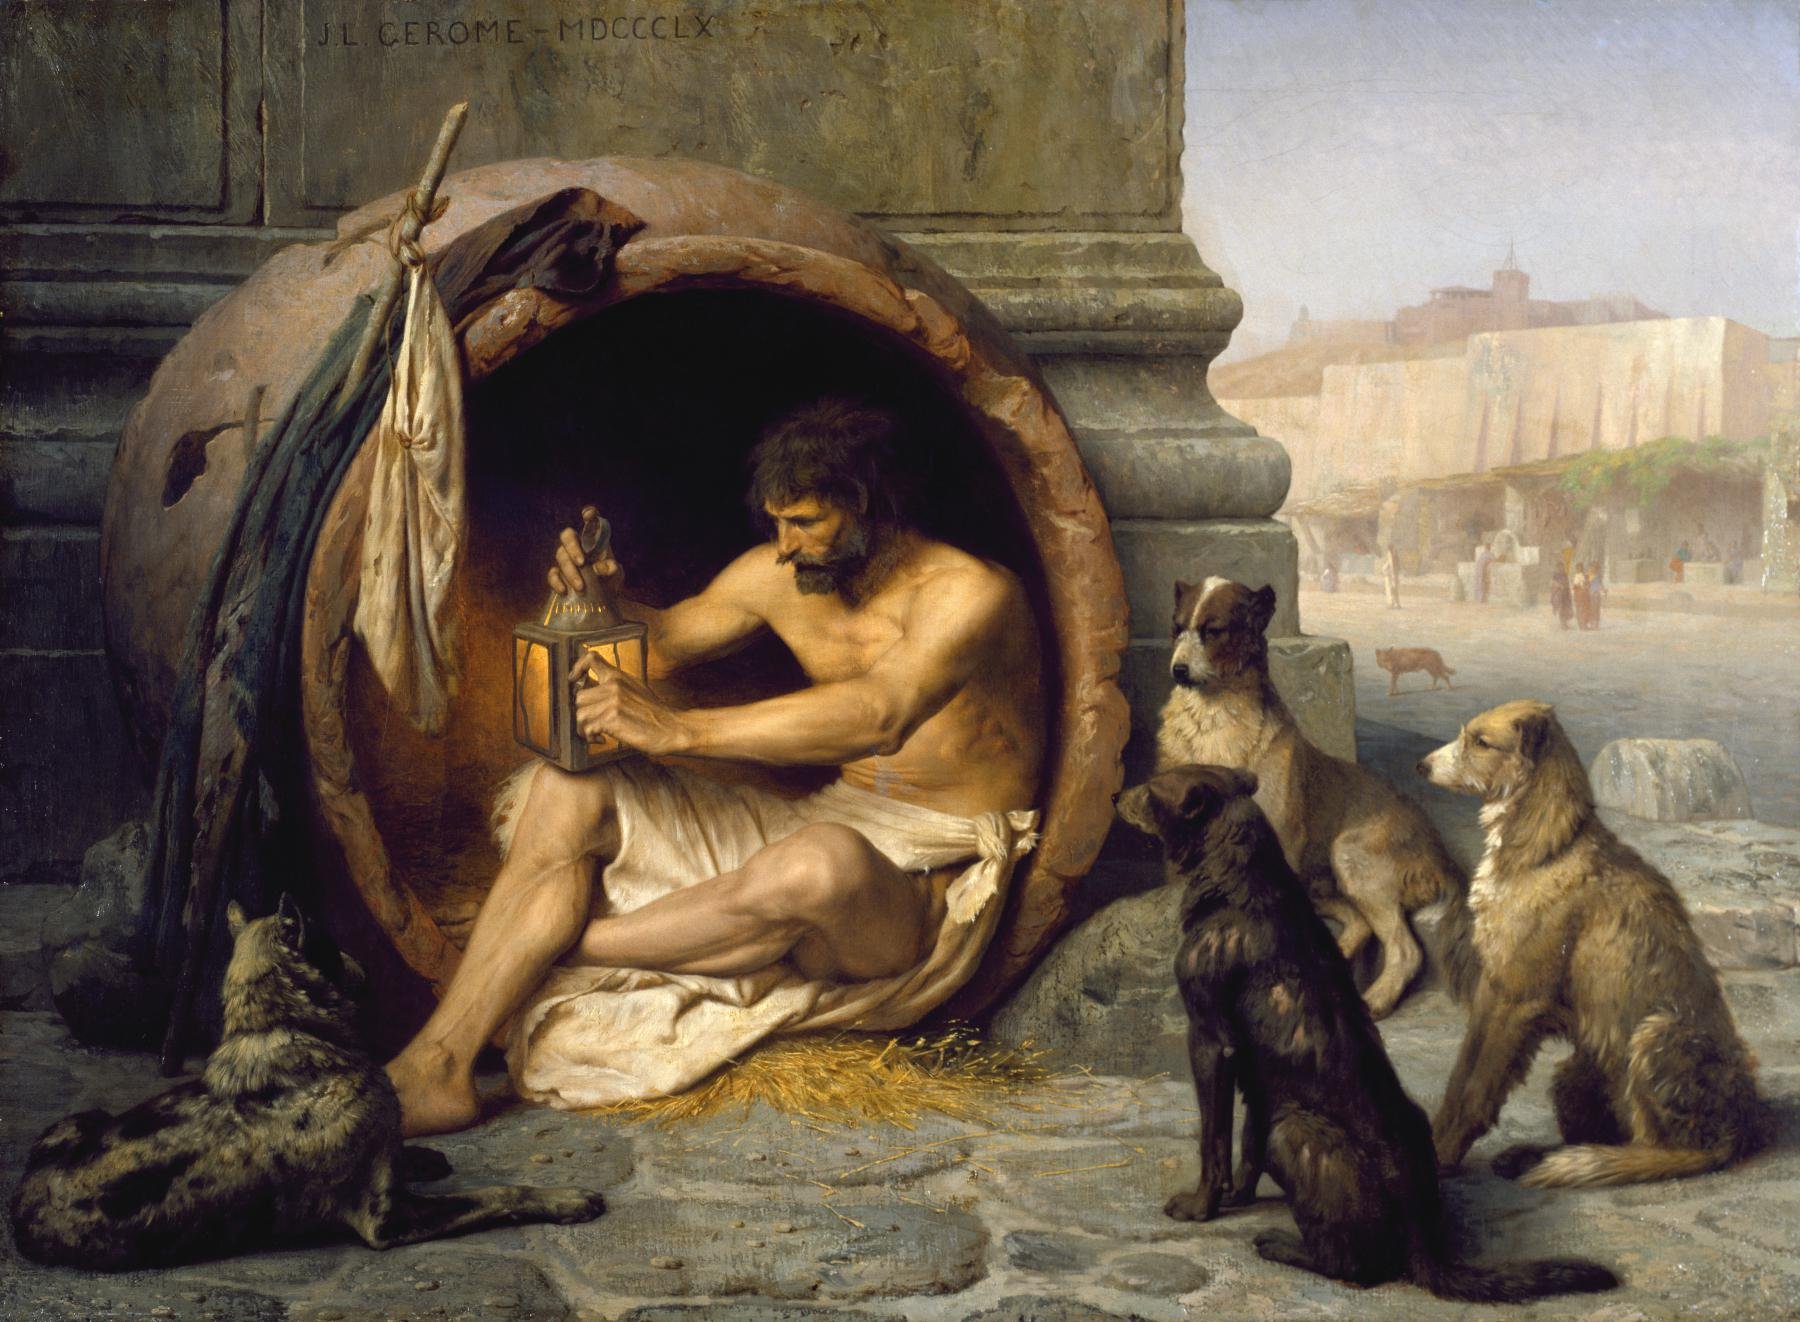 Twisted humor and life advice from Diogenes the Cynic